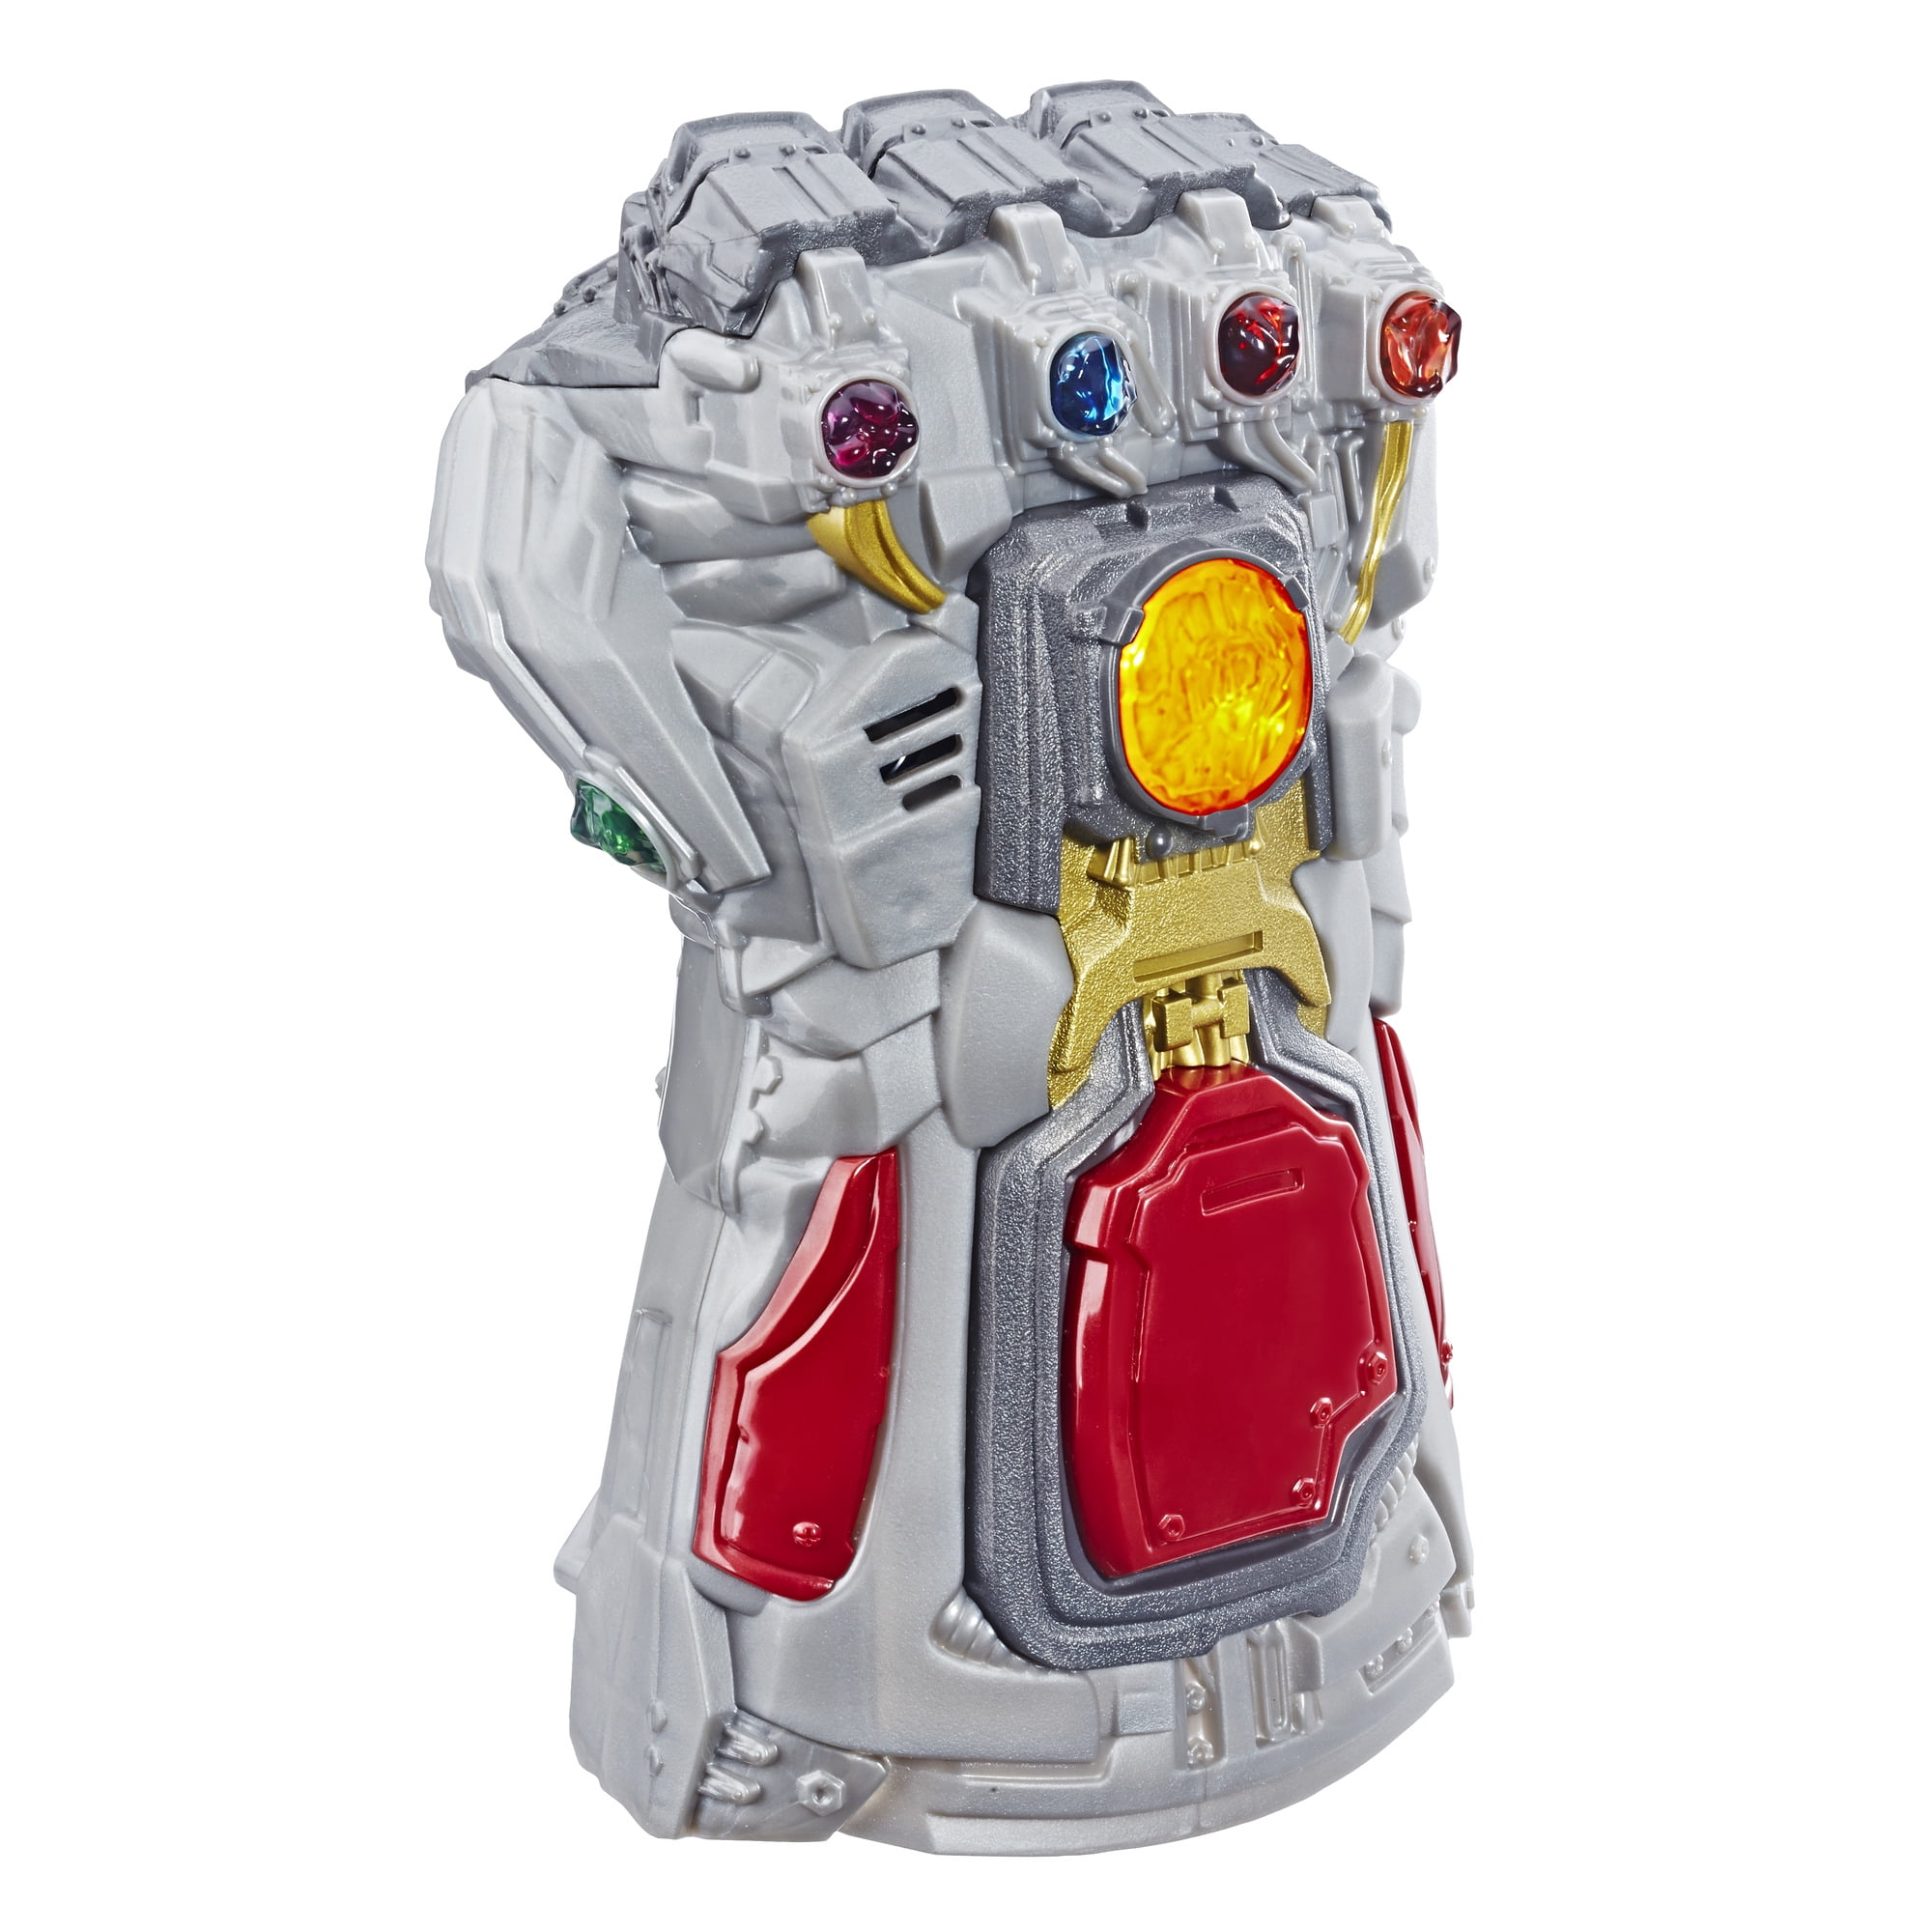 Endgame Red Infinity Gauntlet Electronic Fist Roleplay Toy with Marvel Avengers 